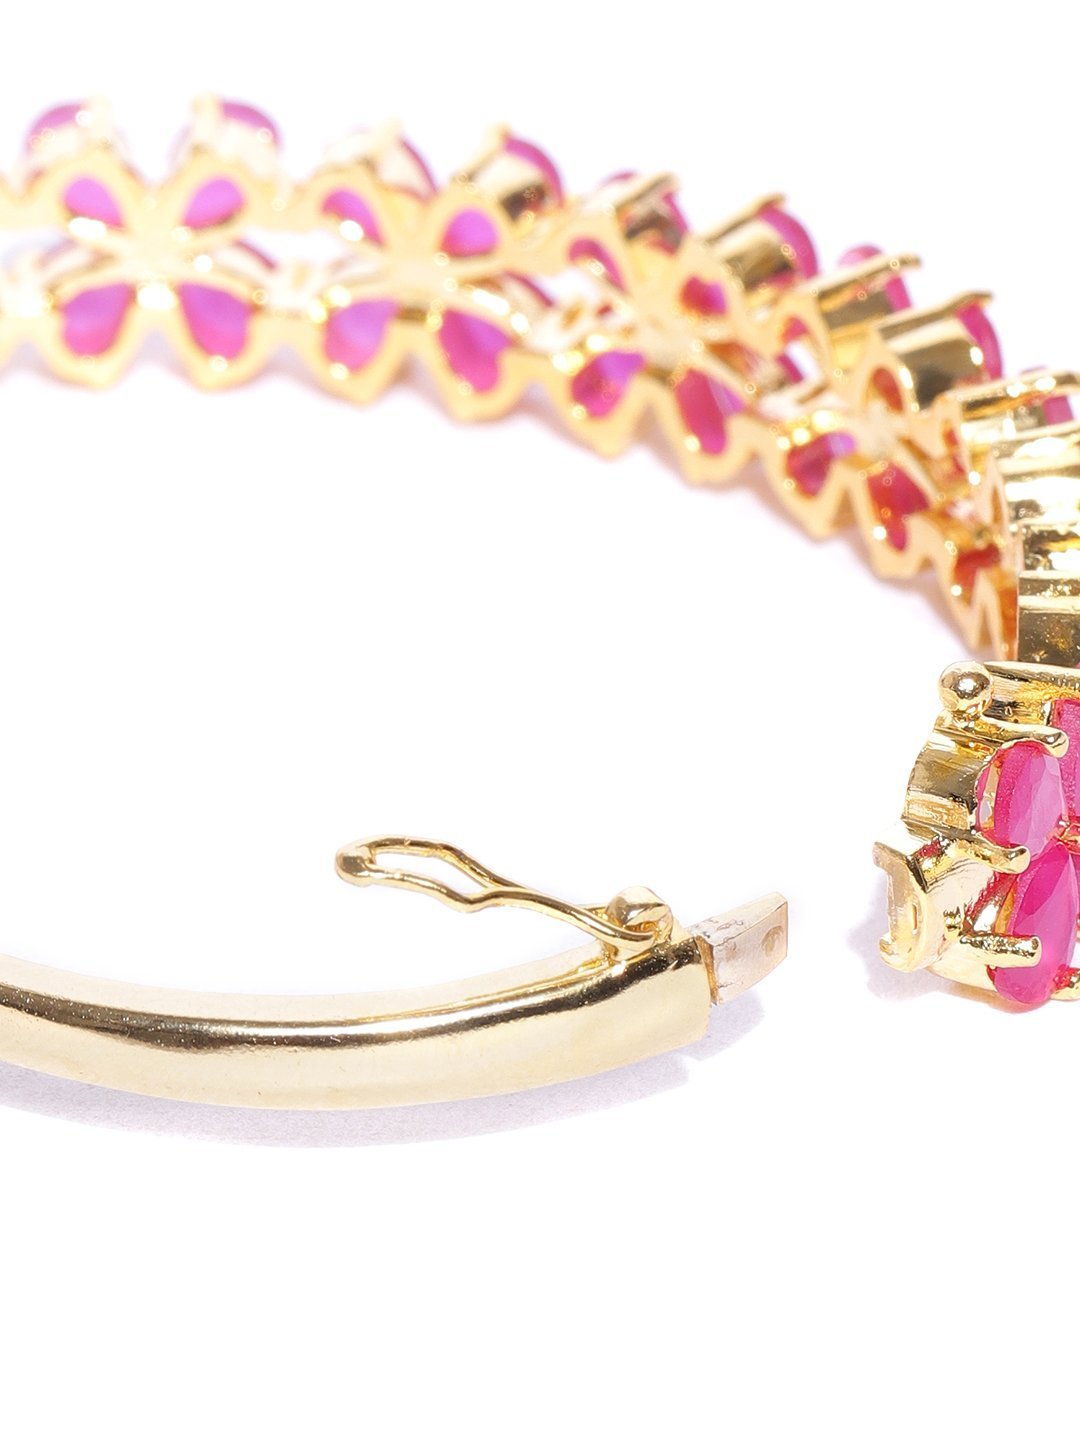 Women's Ruby Stones Studded Gold-Plated Bracelet in Floral Pattern - Priyaasi